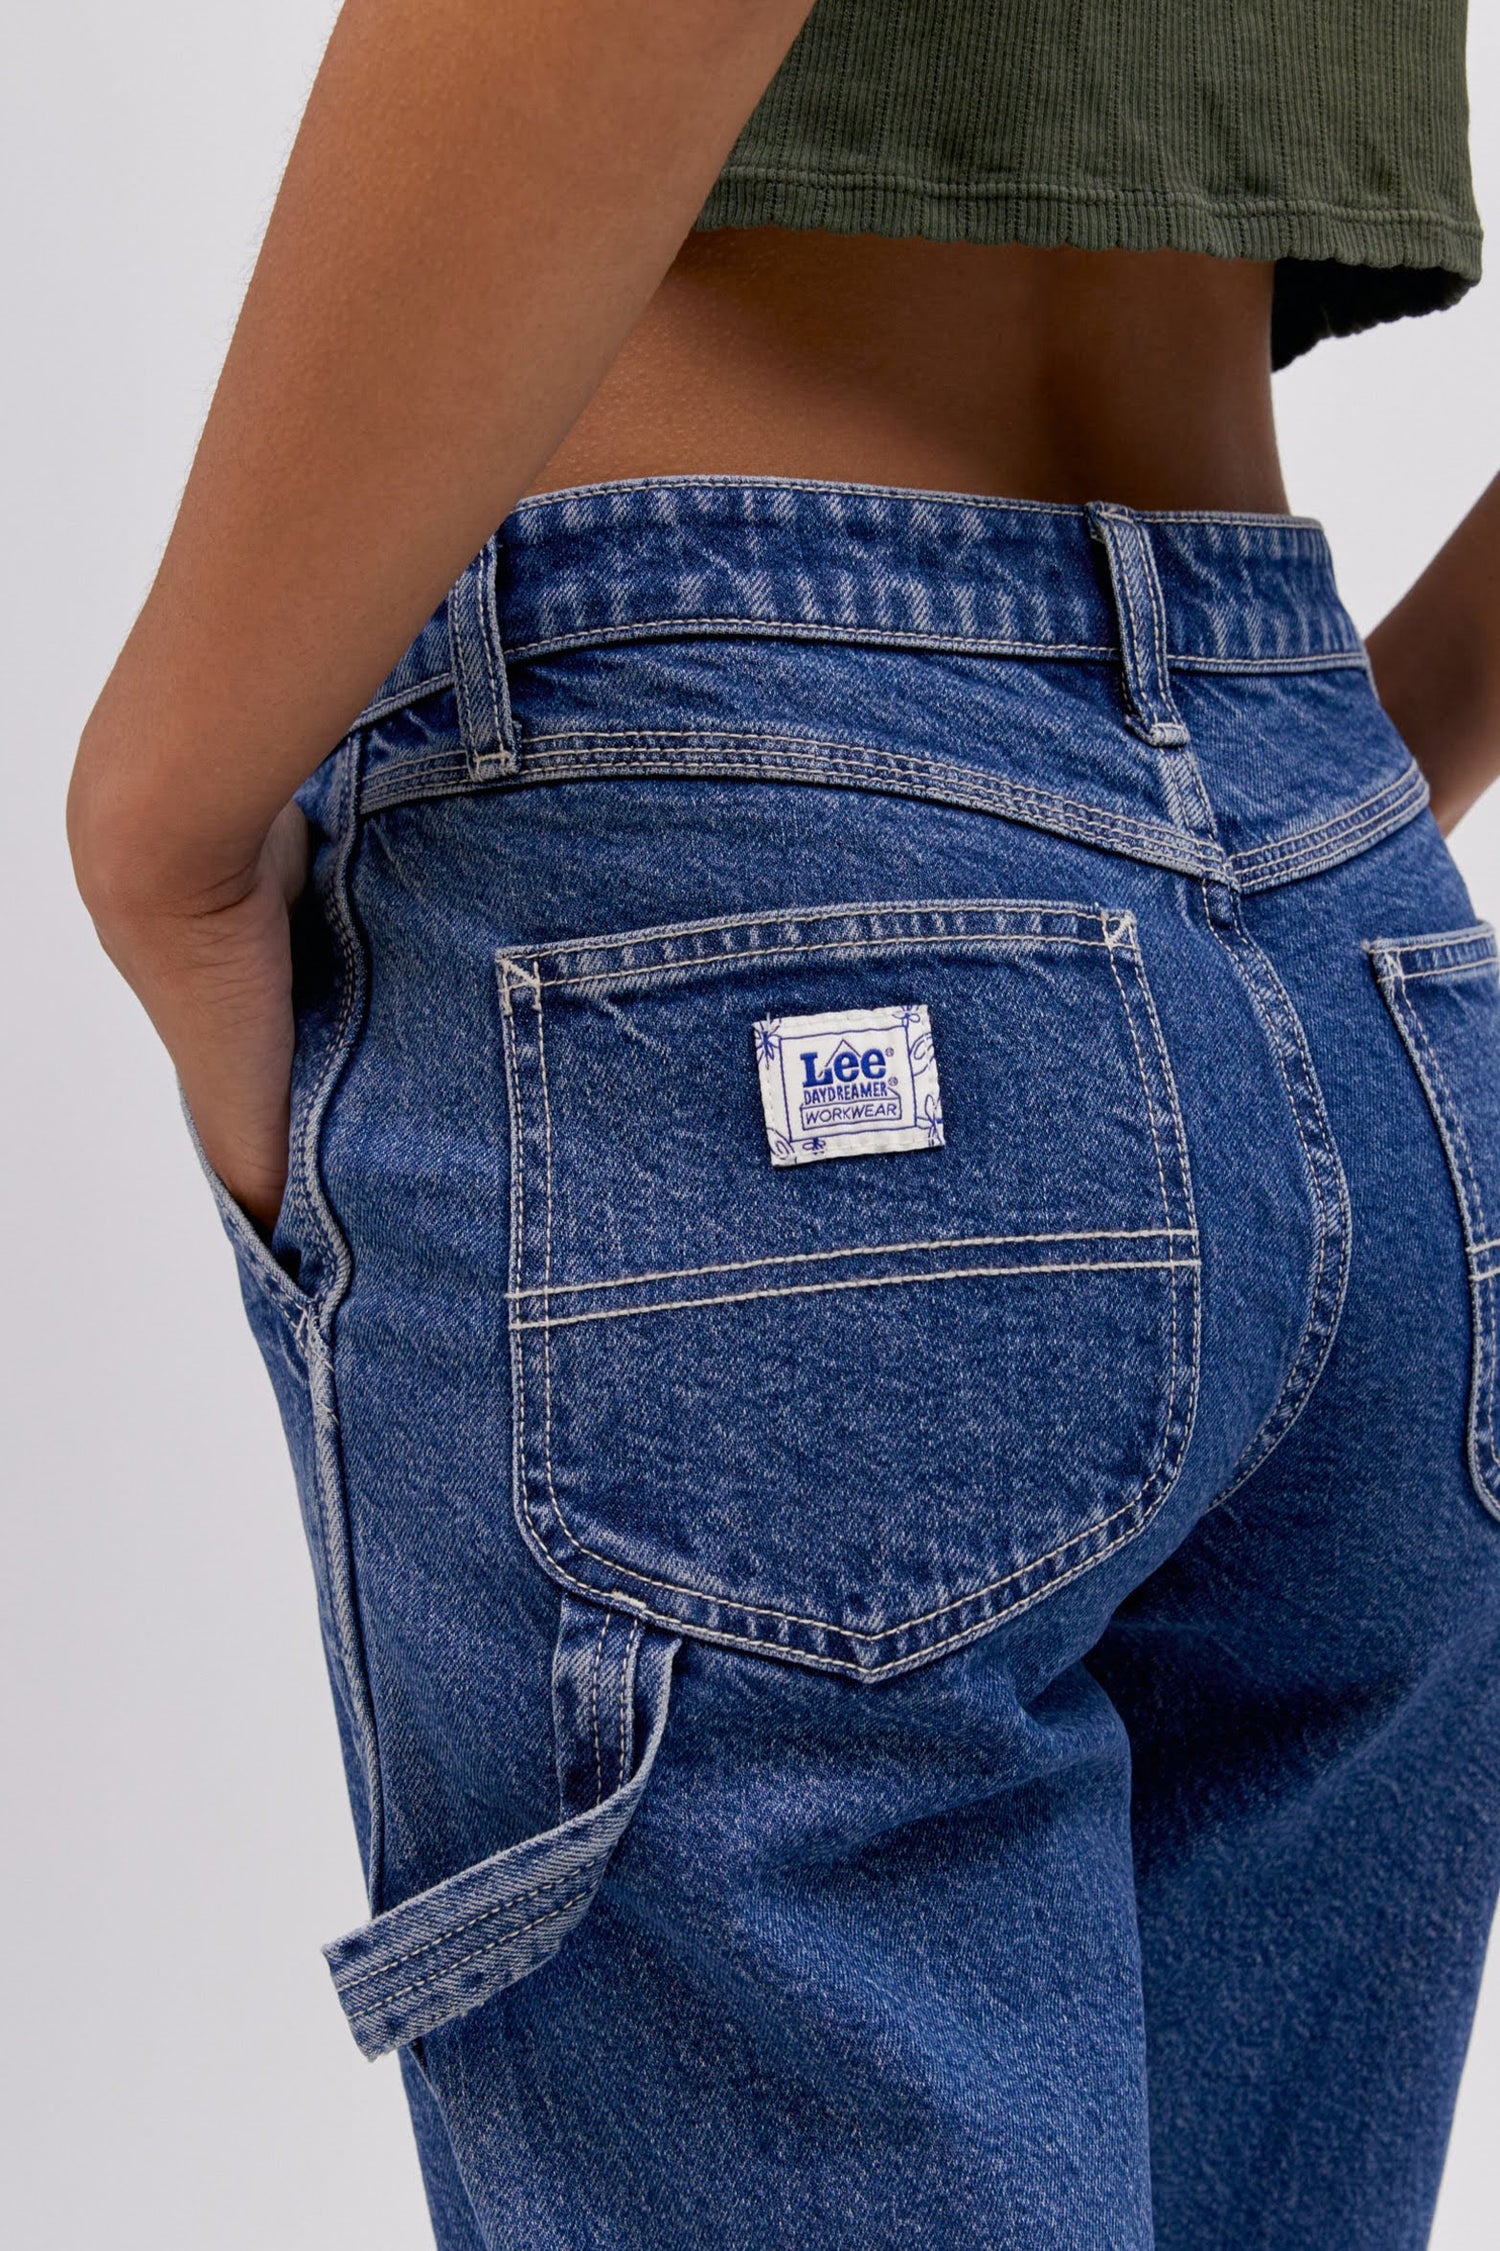 A  model featuring a blue workwear pant made from heavy cotton, accented with key Lee detailing of triple-stitched seams, oversized pockets and a uniform like hammer loop.